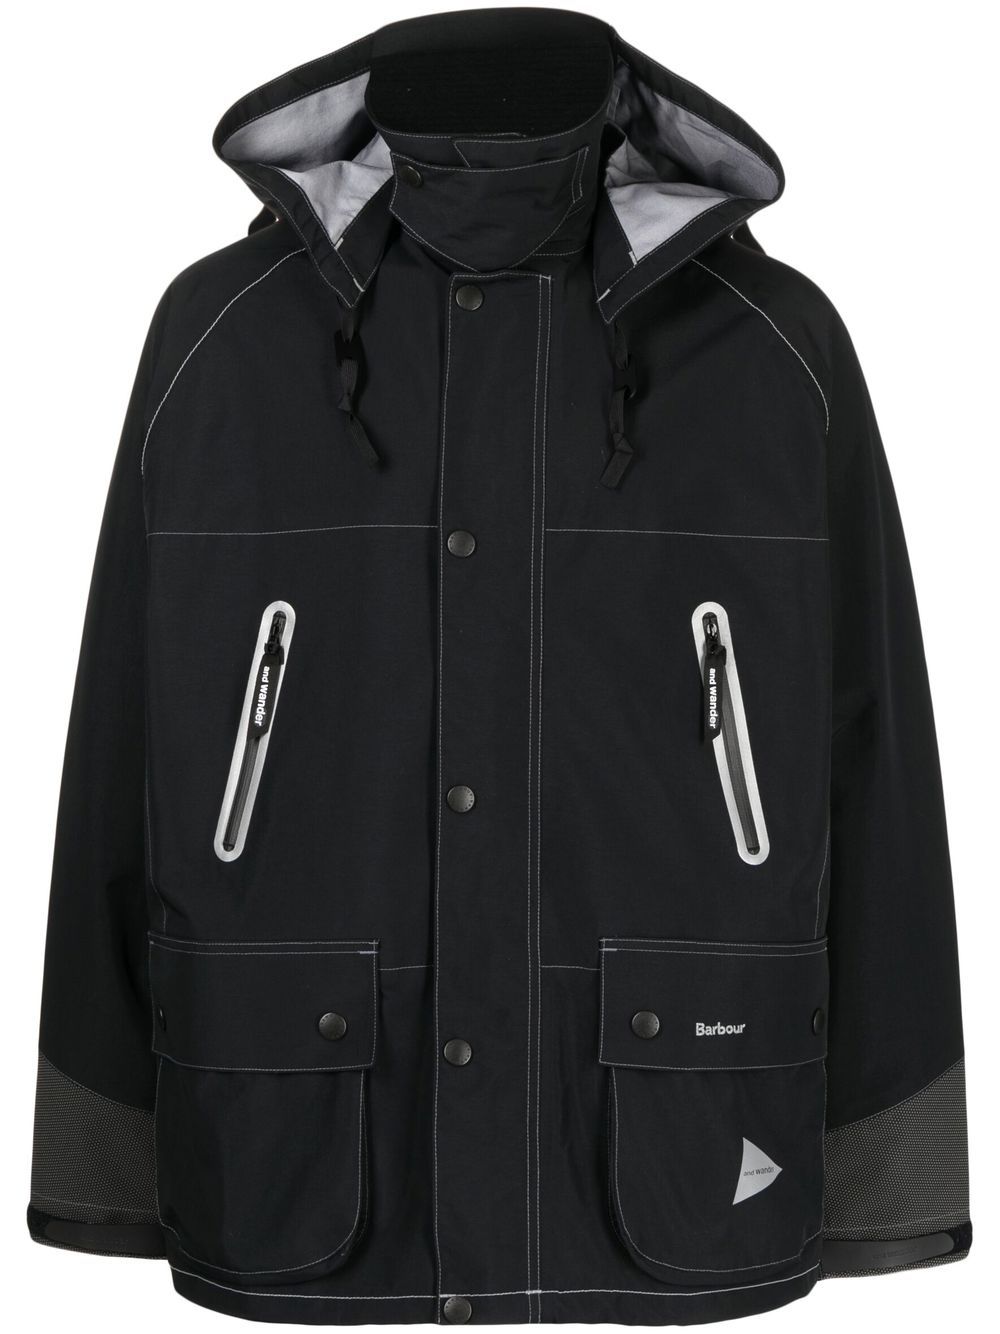 BARBOUR AND WANDER 3L HOODED JACKET